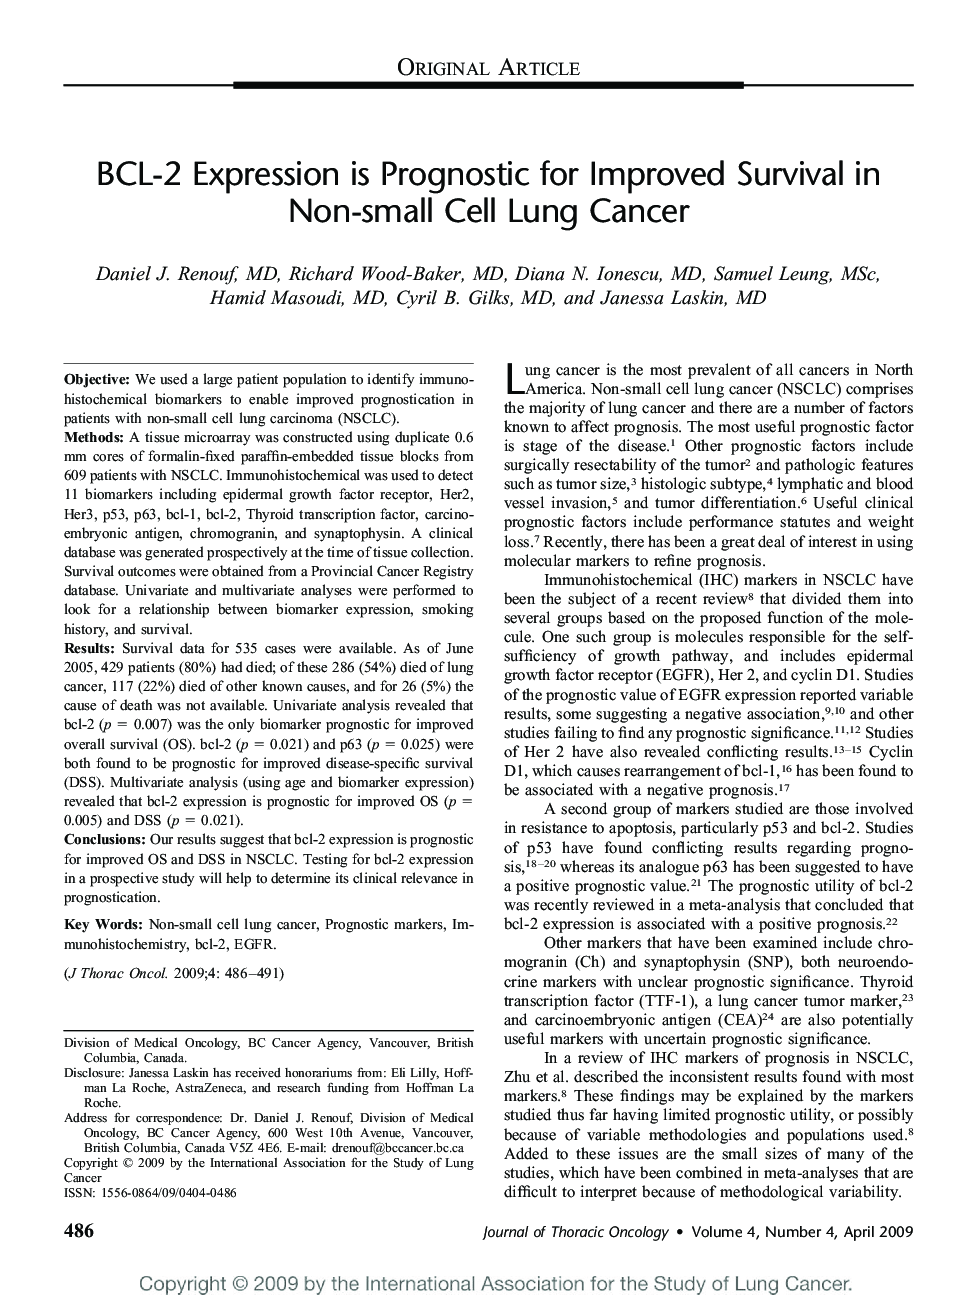 BCL-2 Expression is Prognostic for Improved Survival in Non-small Cell Lung Cancer 